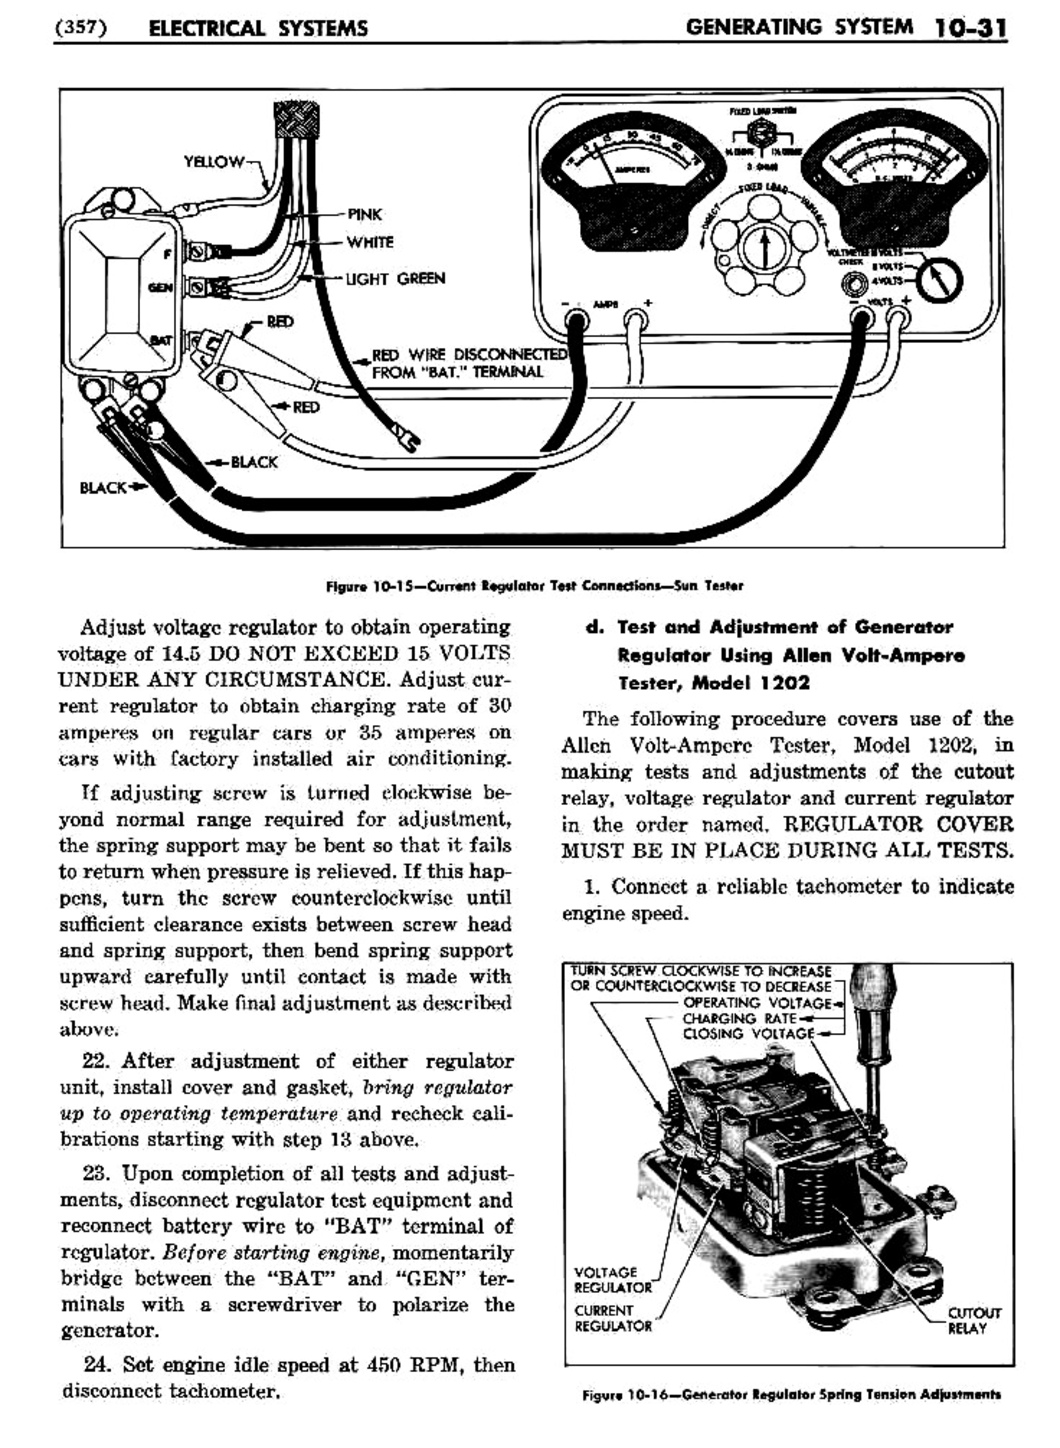 n_11 1956 Buick Shop Manual - Electrical Systems-031-031.jpg